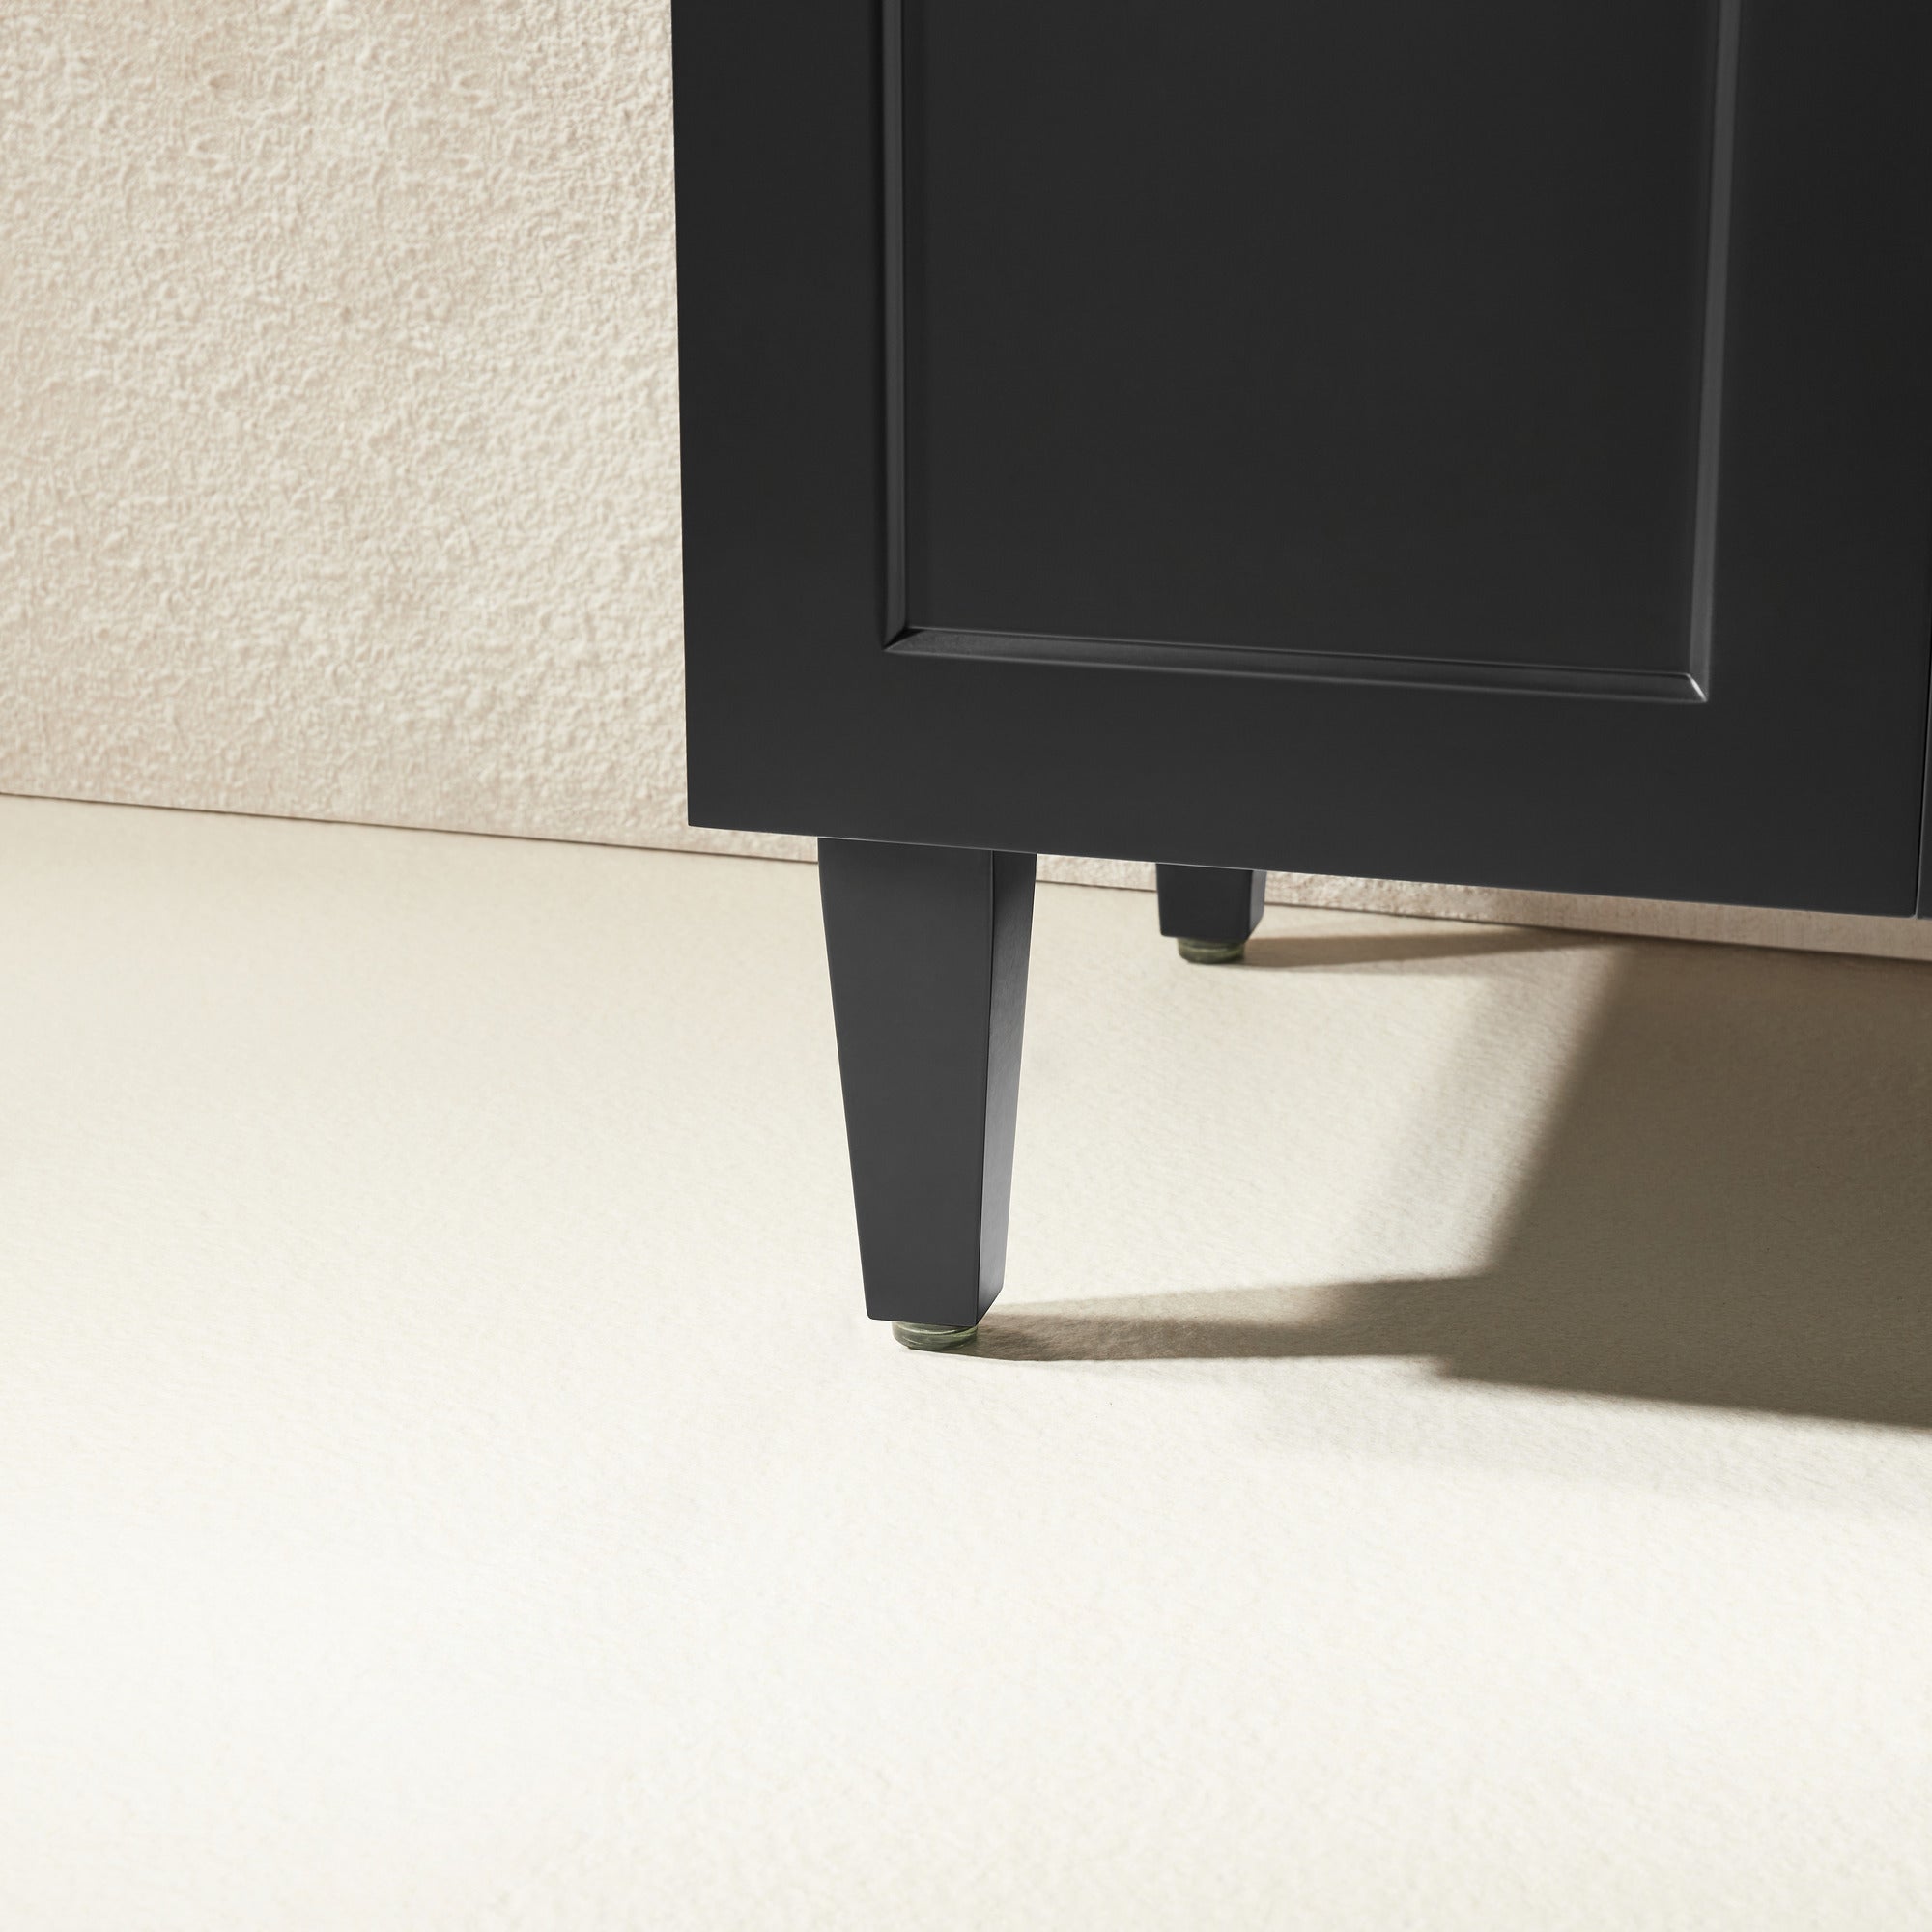 CETO HARRINGTON MATTE BLACK 750MM SINGLE BOWL FLOOR STANDING VANITY (AVAILABLE IN LEFT AND RIGHT HAND DRAWER)